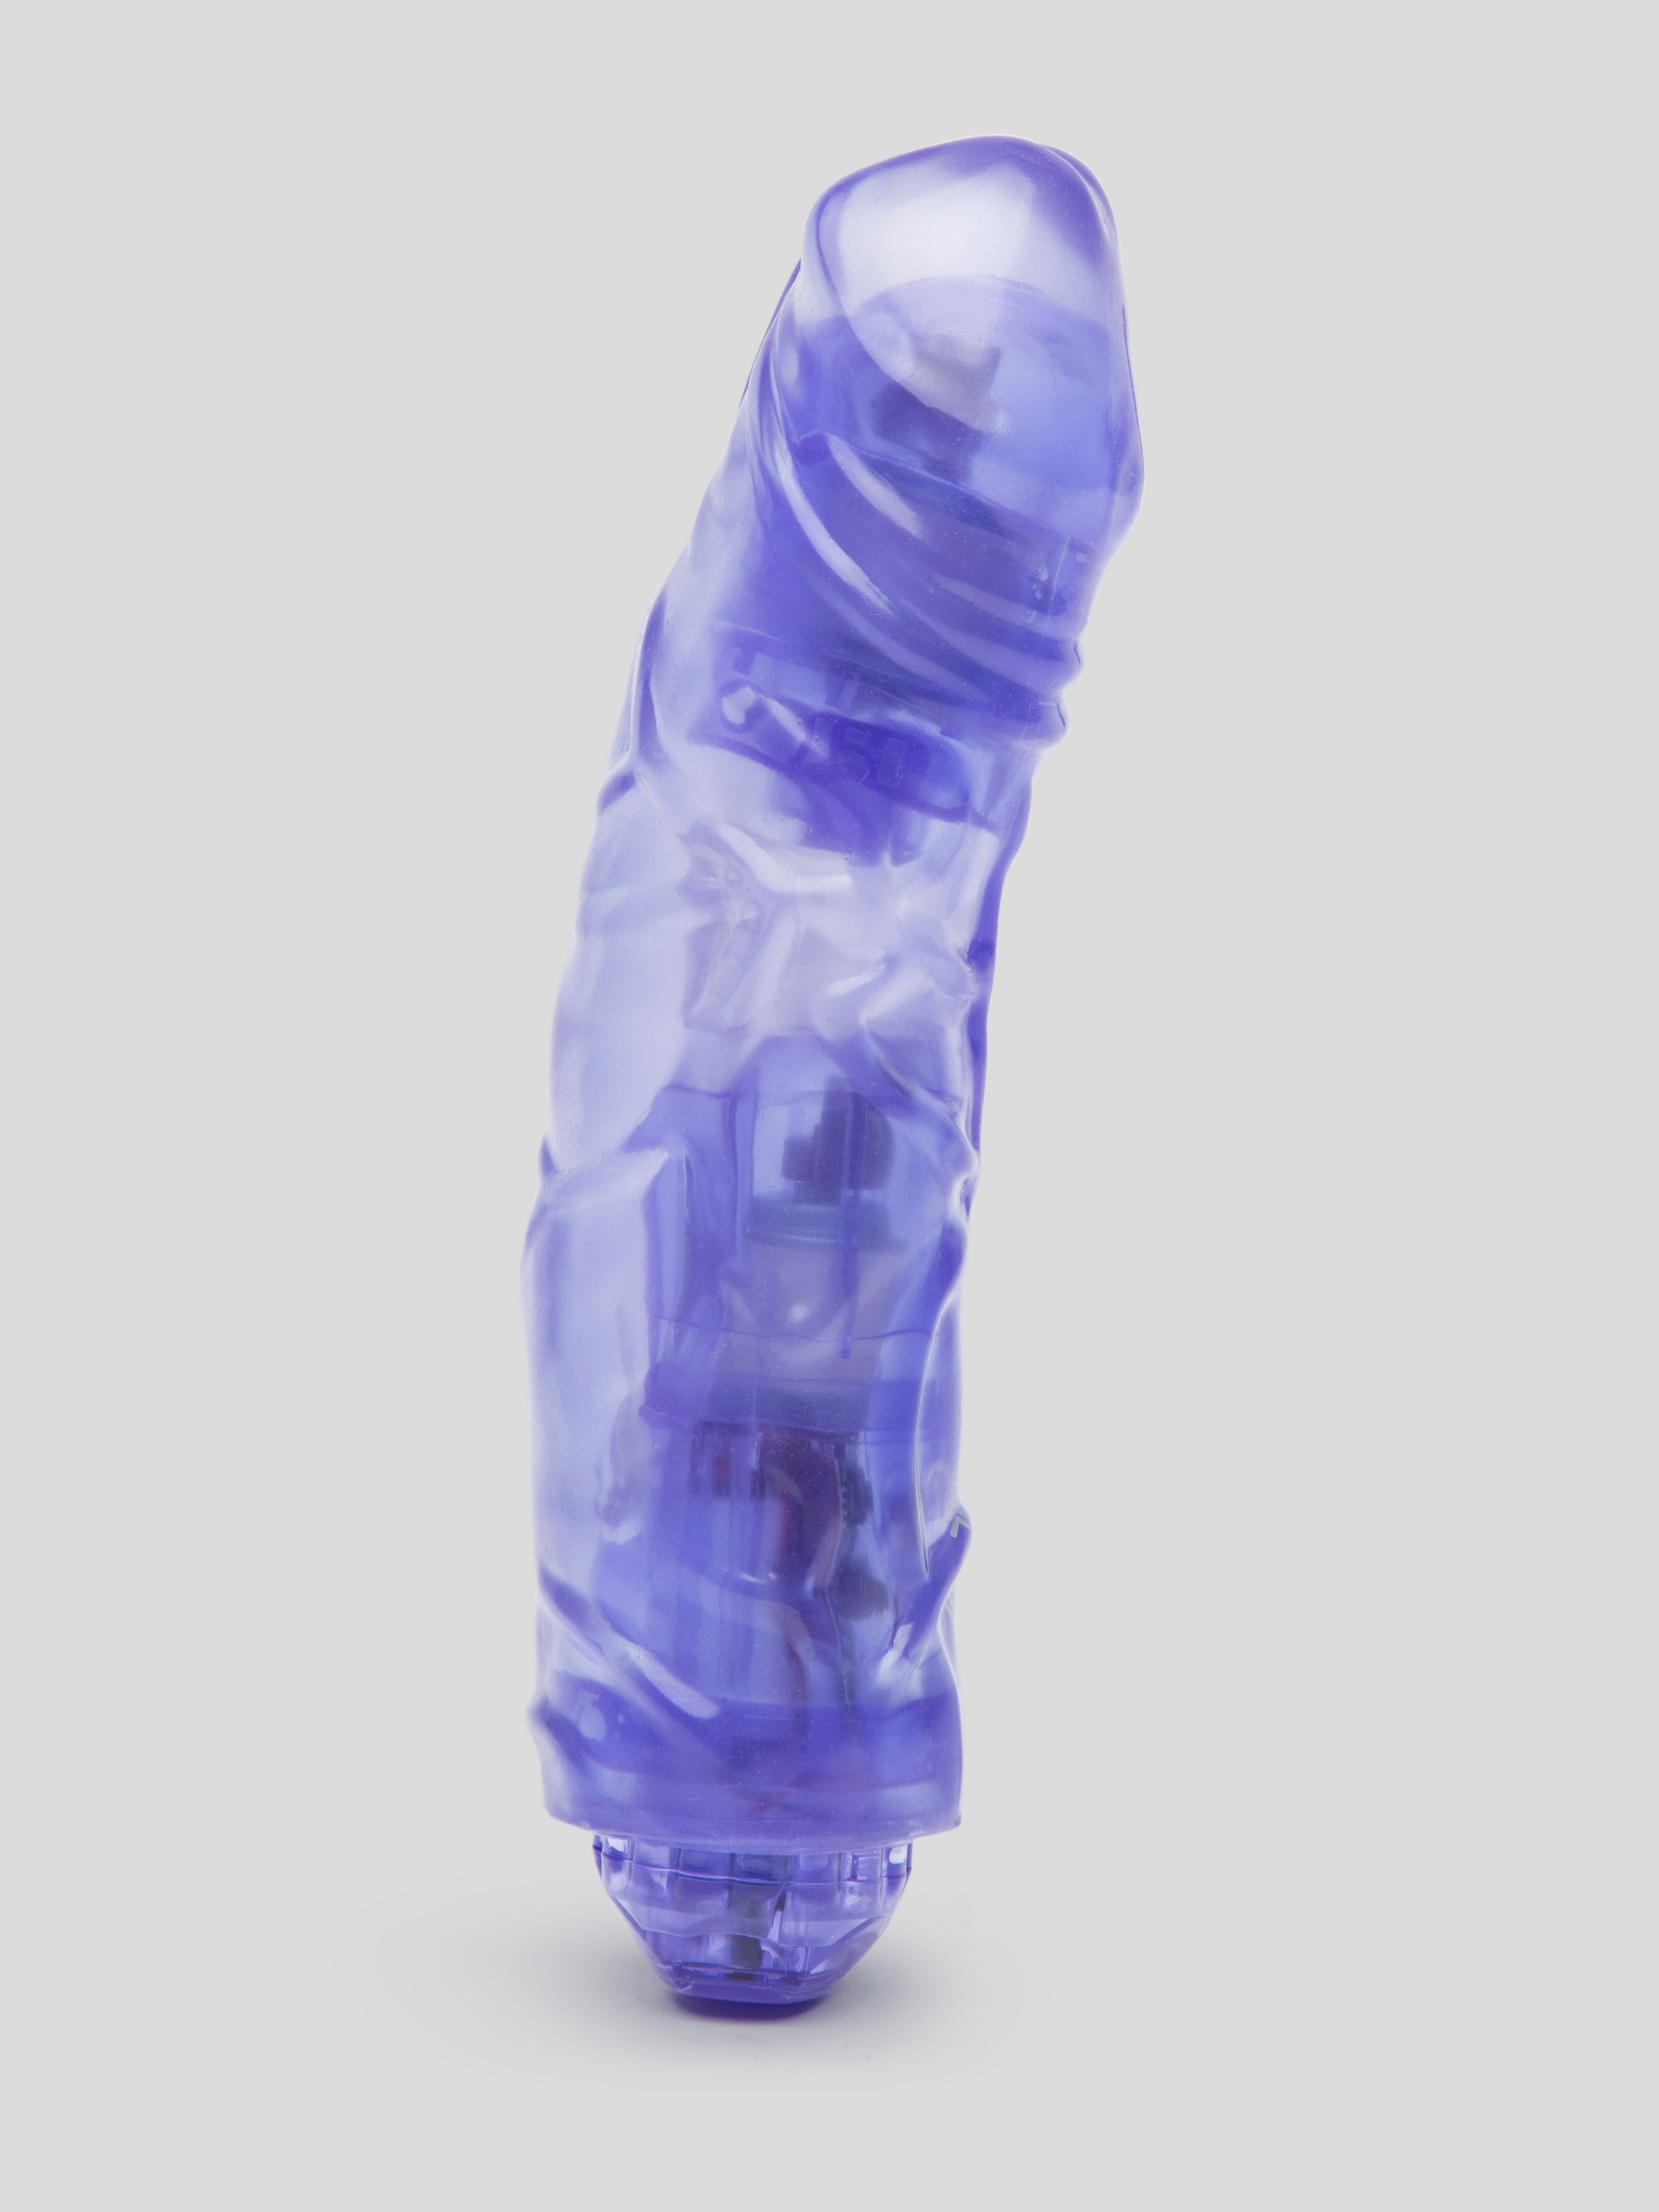 Dual Motor Rechargeable Extra Girthy Realistic Dildo Vibrator 8 Inch - Purple